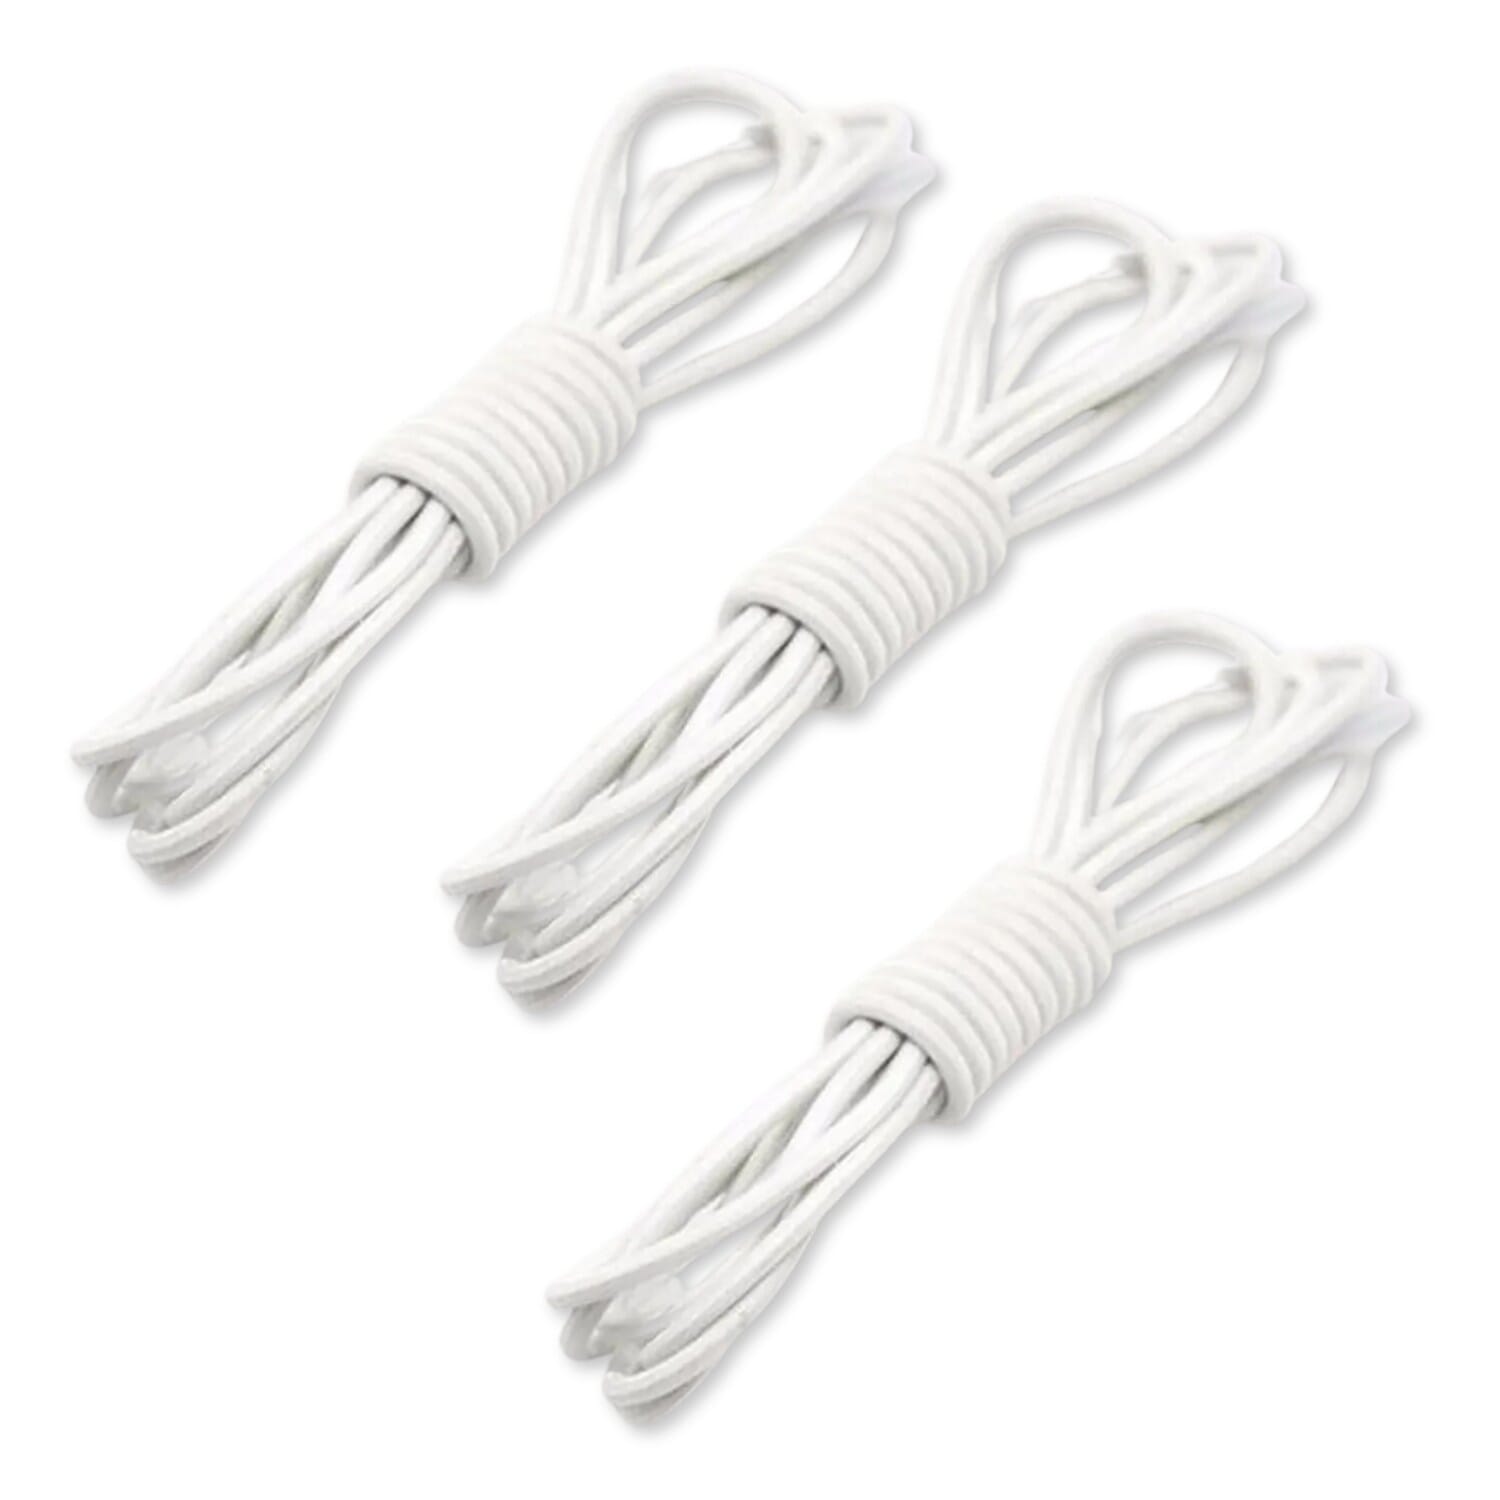 View Elastic Shoe Laces White 3 Pairs information